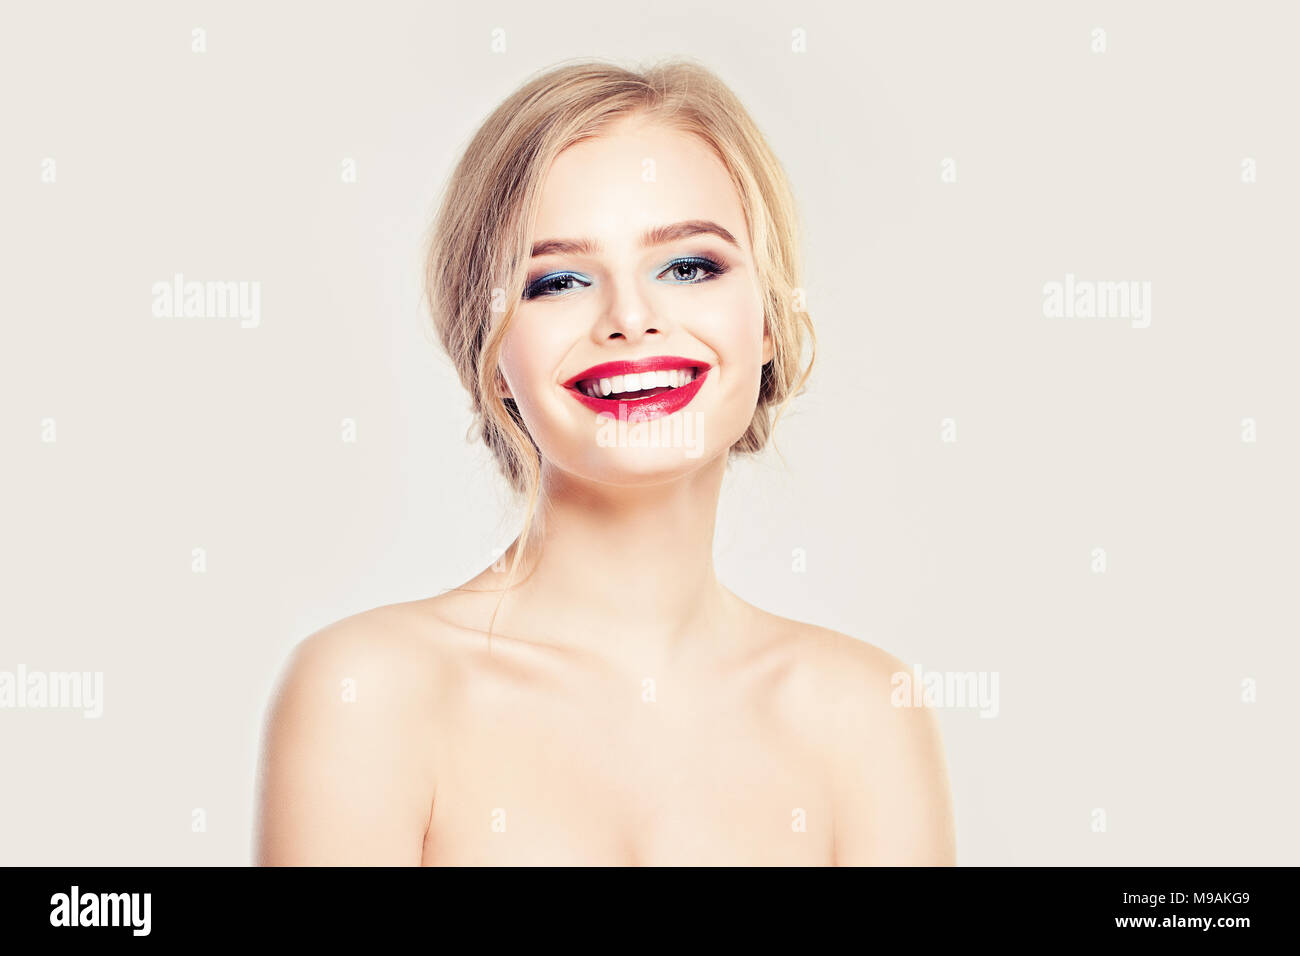 Smiling Woman. Healthy Skin, Cute Smile Stock Photo